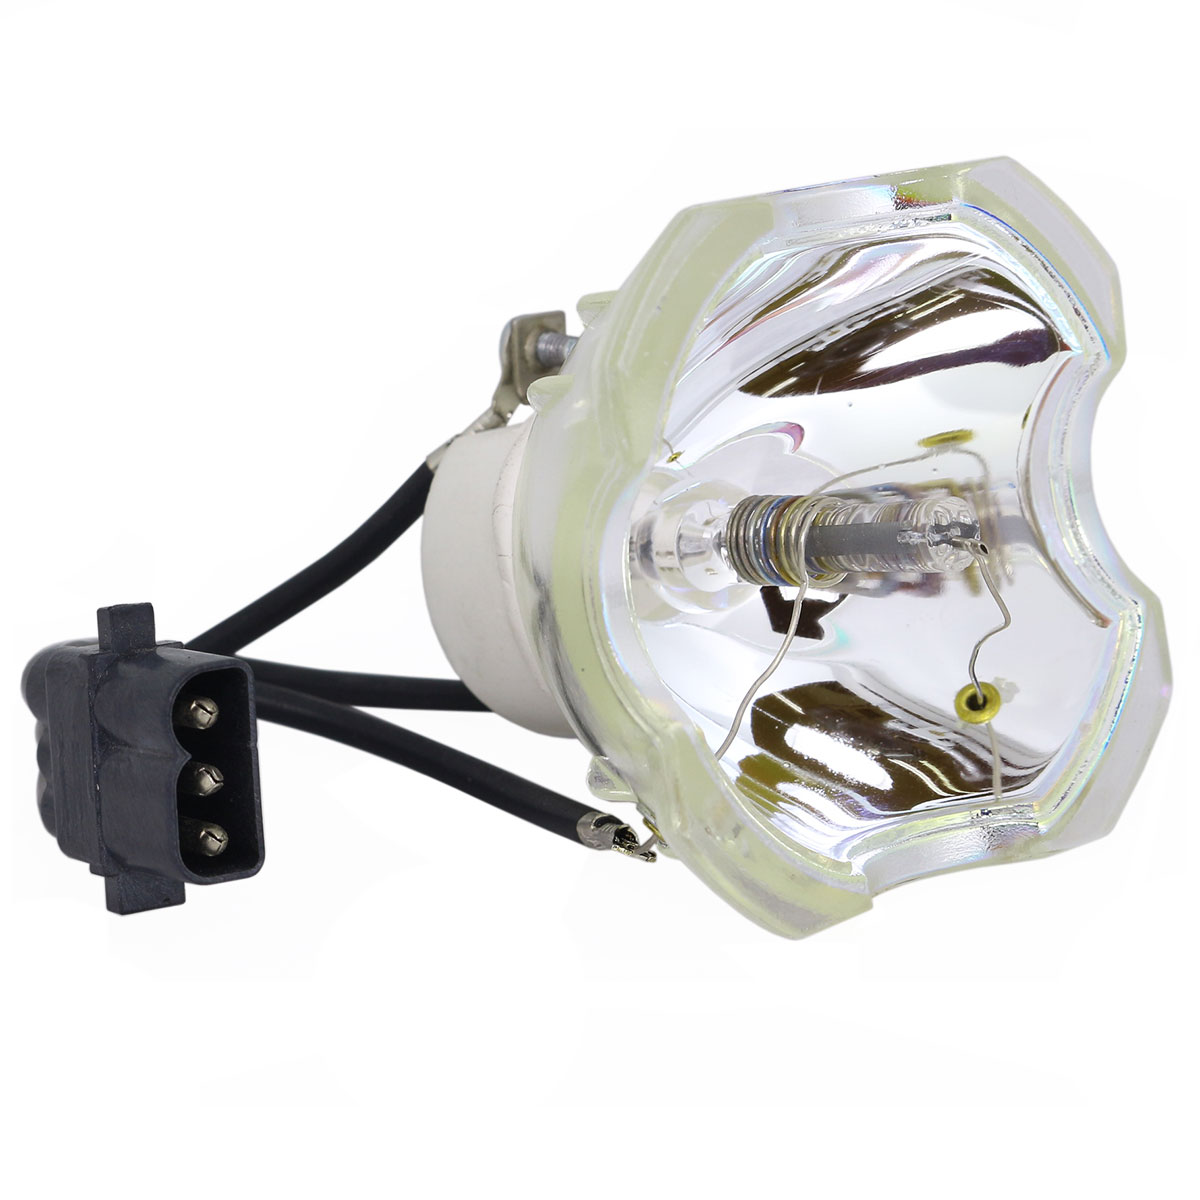 Lutema Economy Bulb for InFocus SP-LAMP-046 Projector (Lamp Only) - image 2 of 6